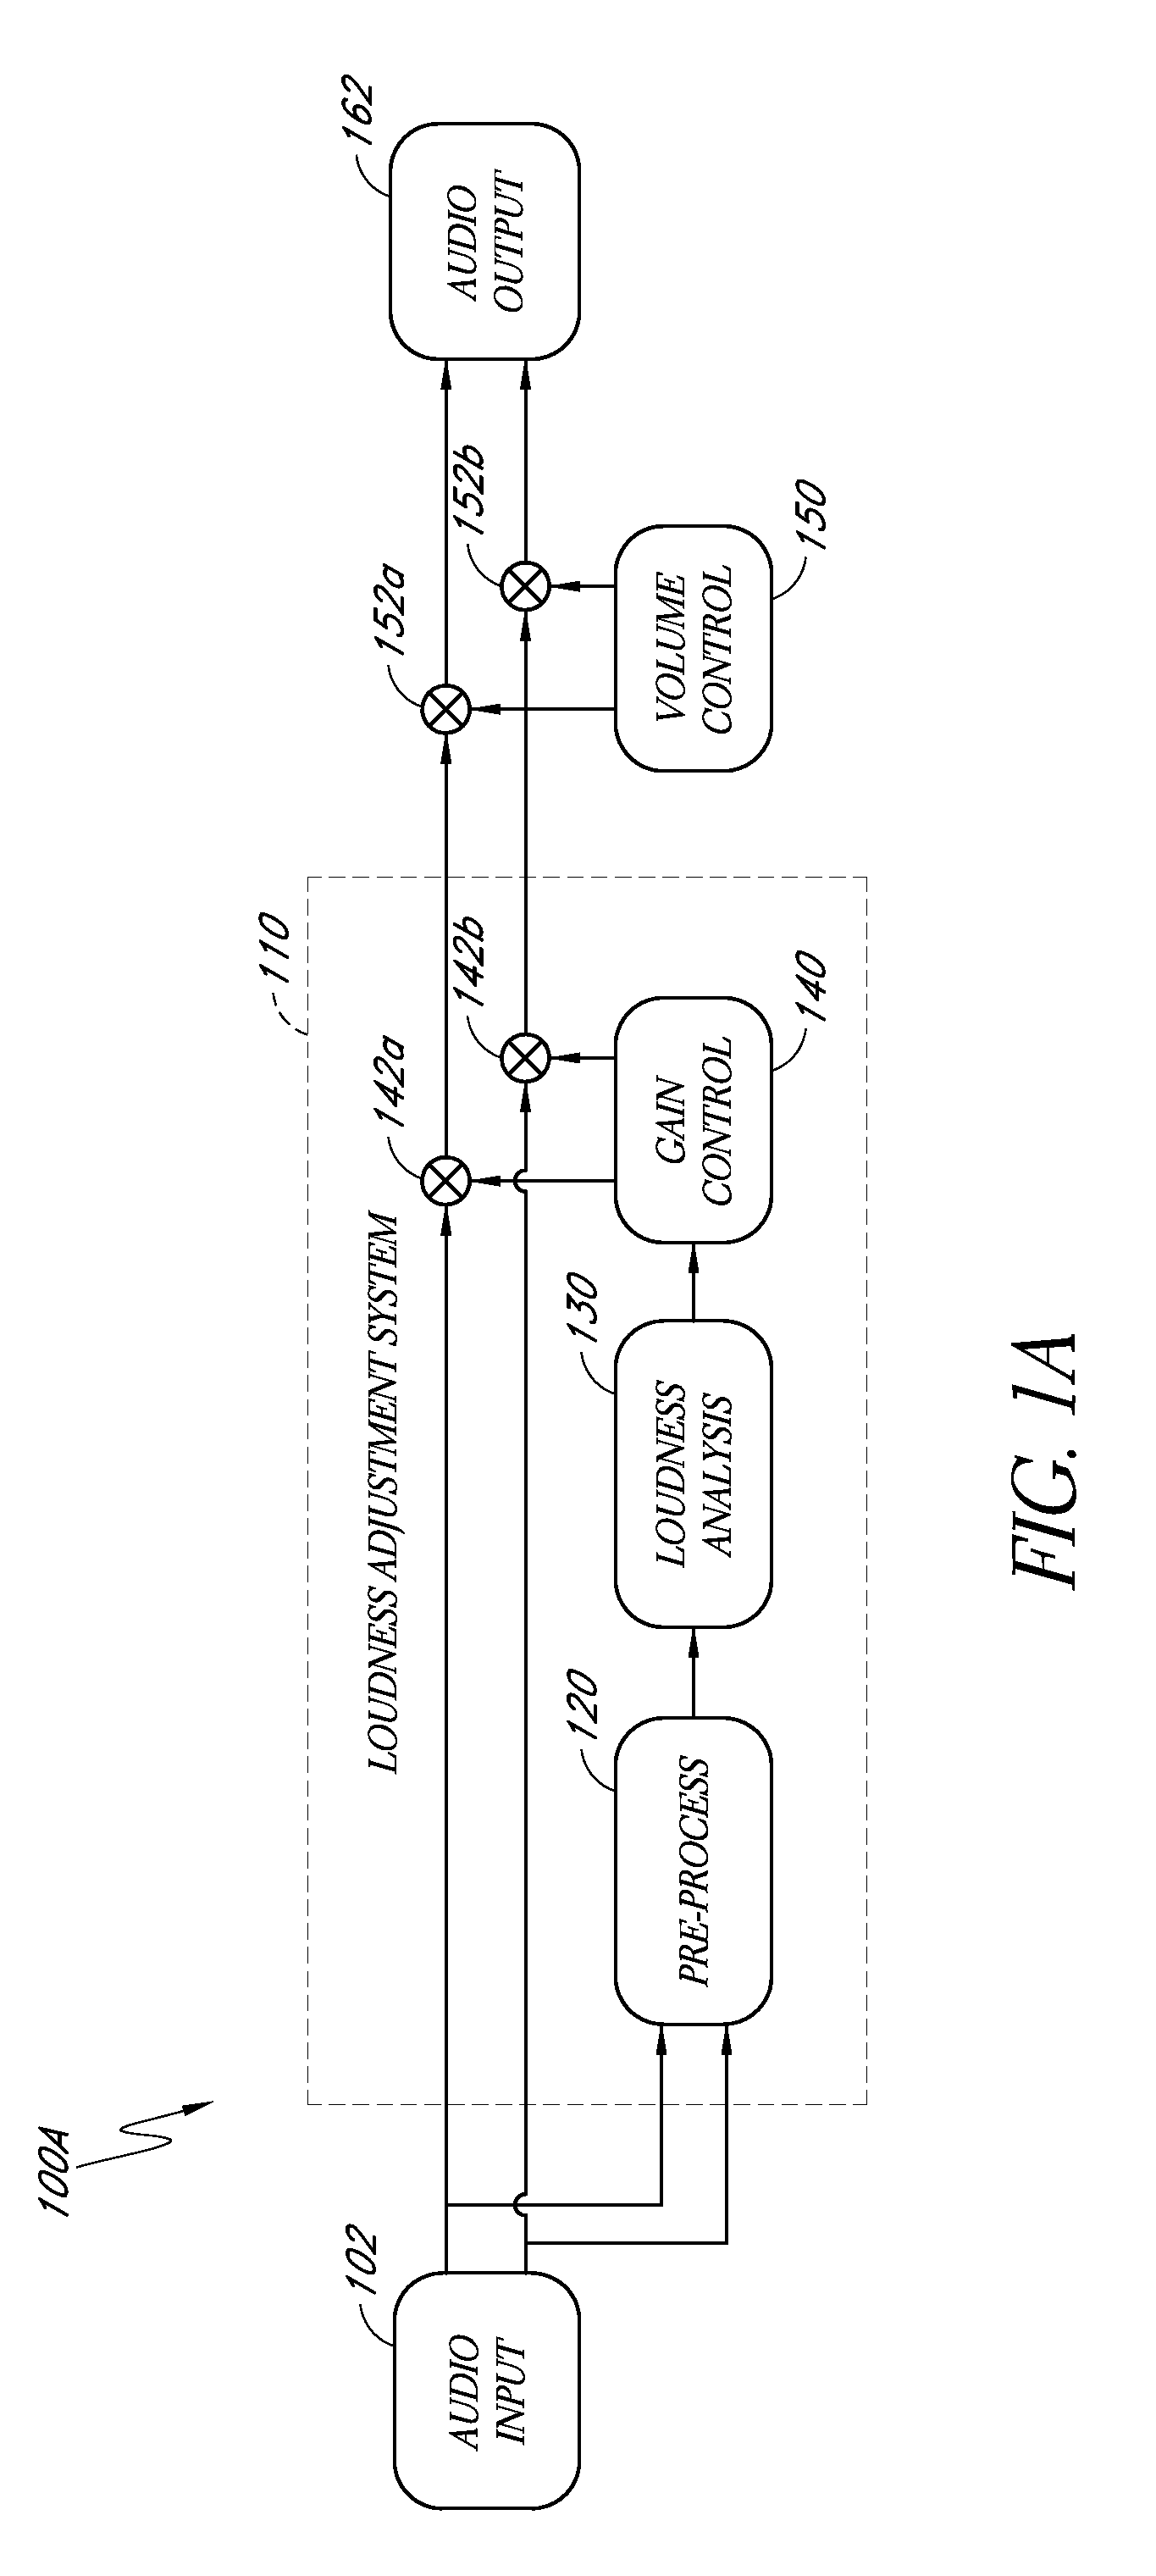 System for adjusting perceived loudness of audio signals